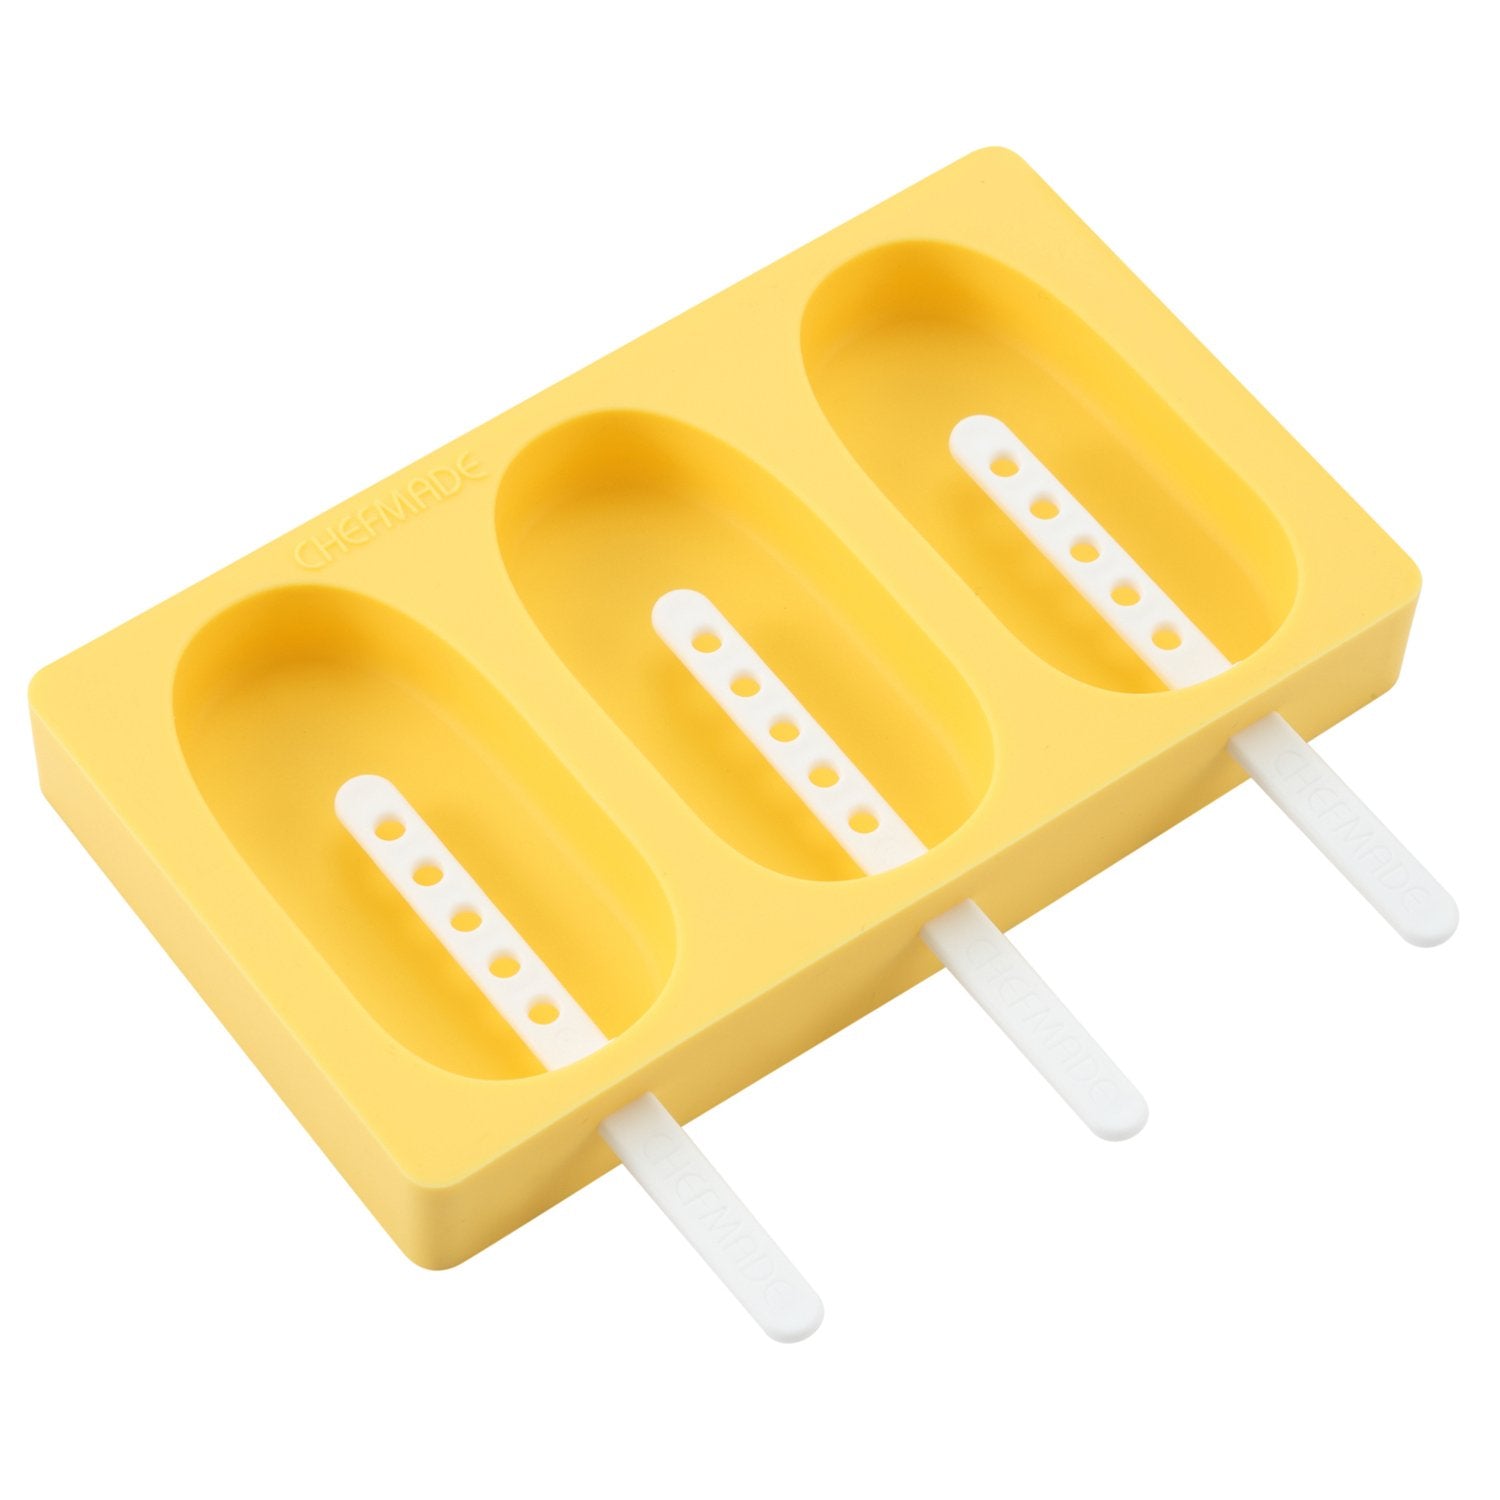 CHEFMADE Classical Silicone Ice Cream Moulds (WK9443)